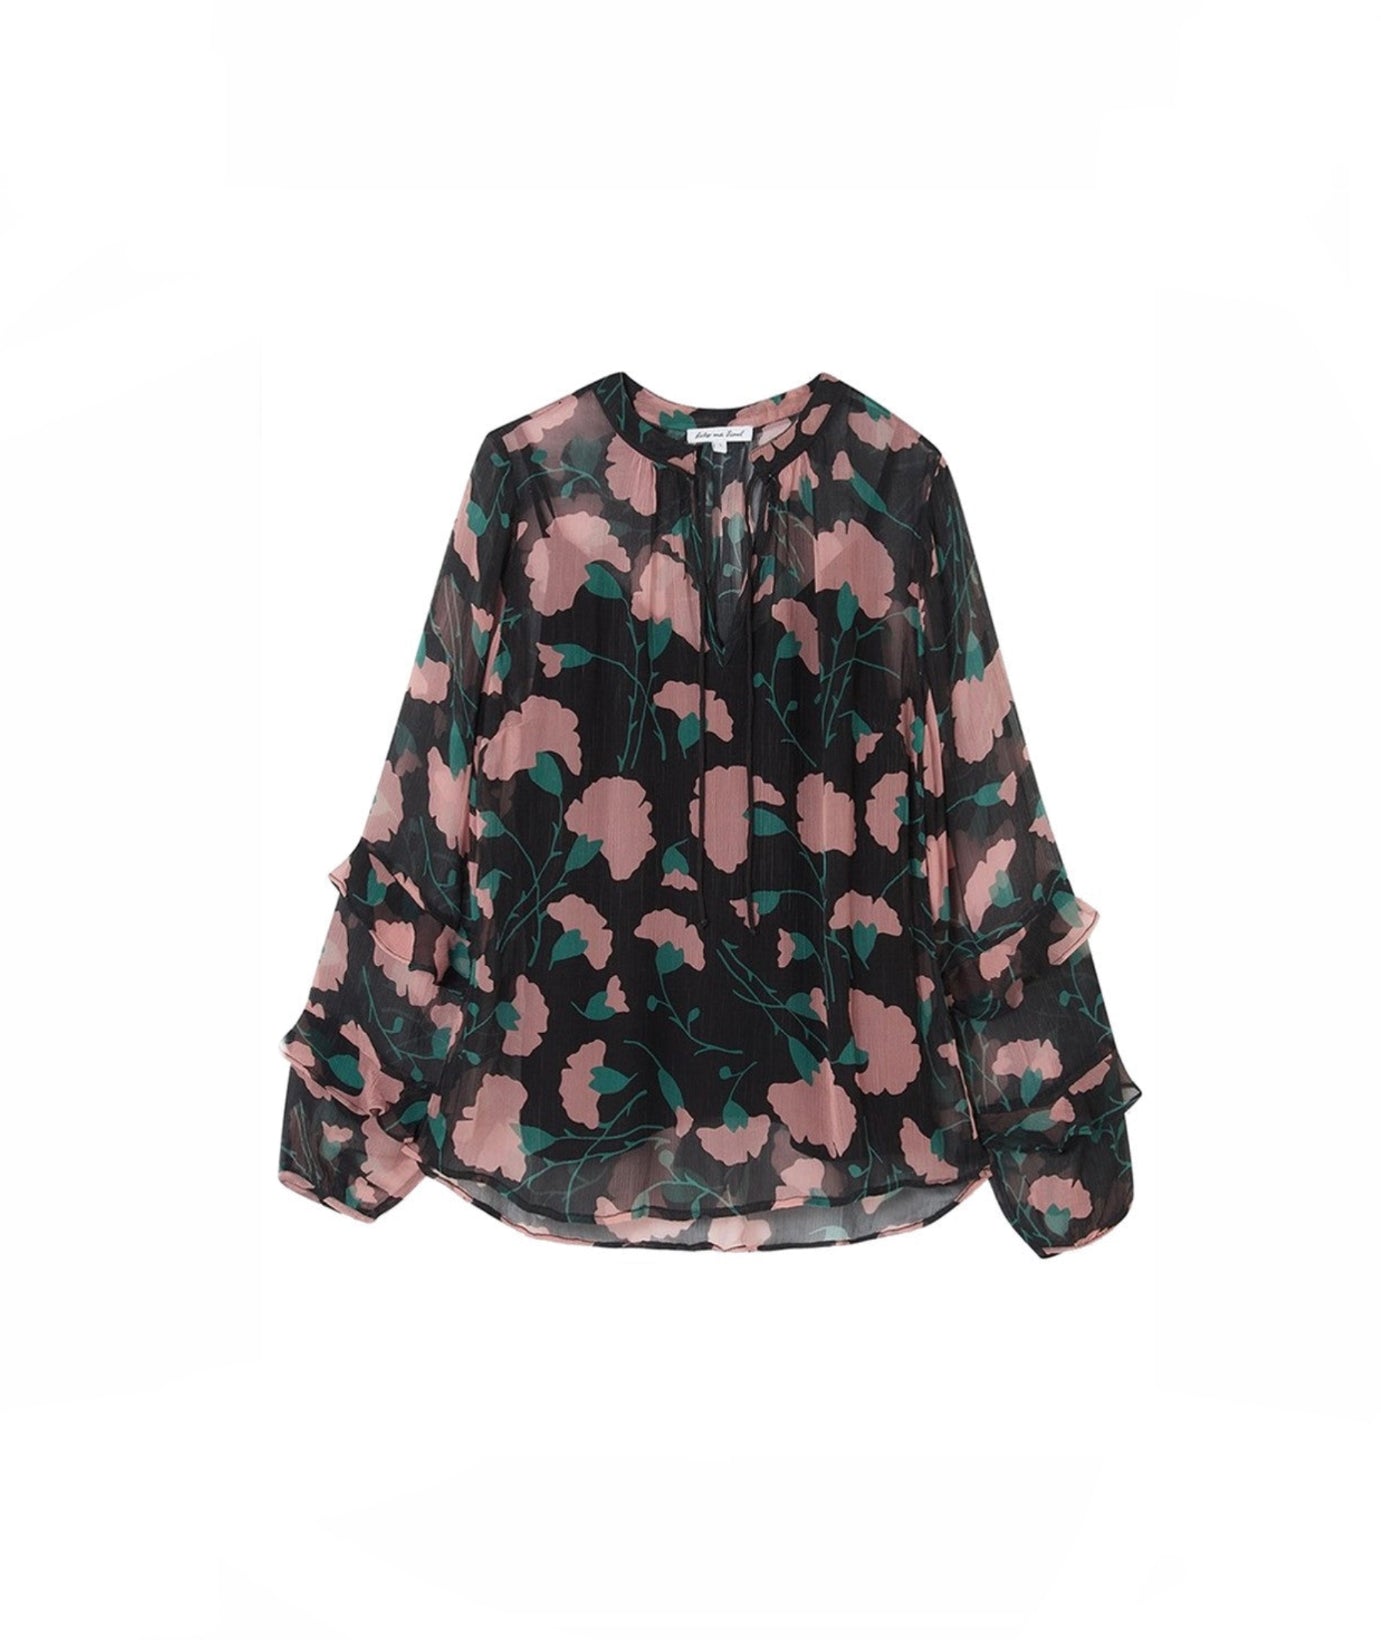 Lily & Lional Sheer Floral Print Blouse